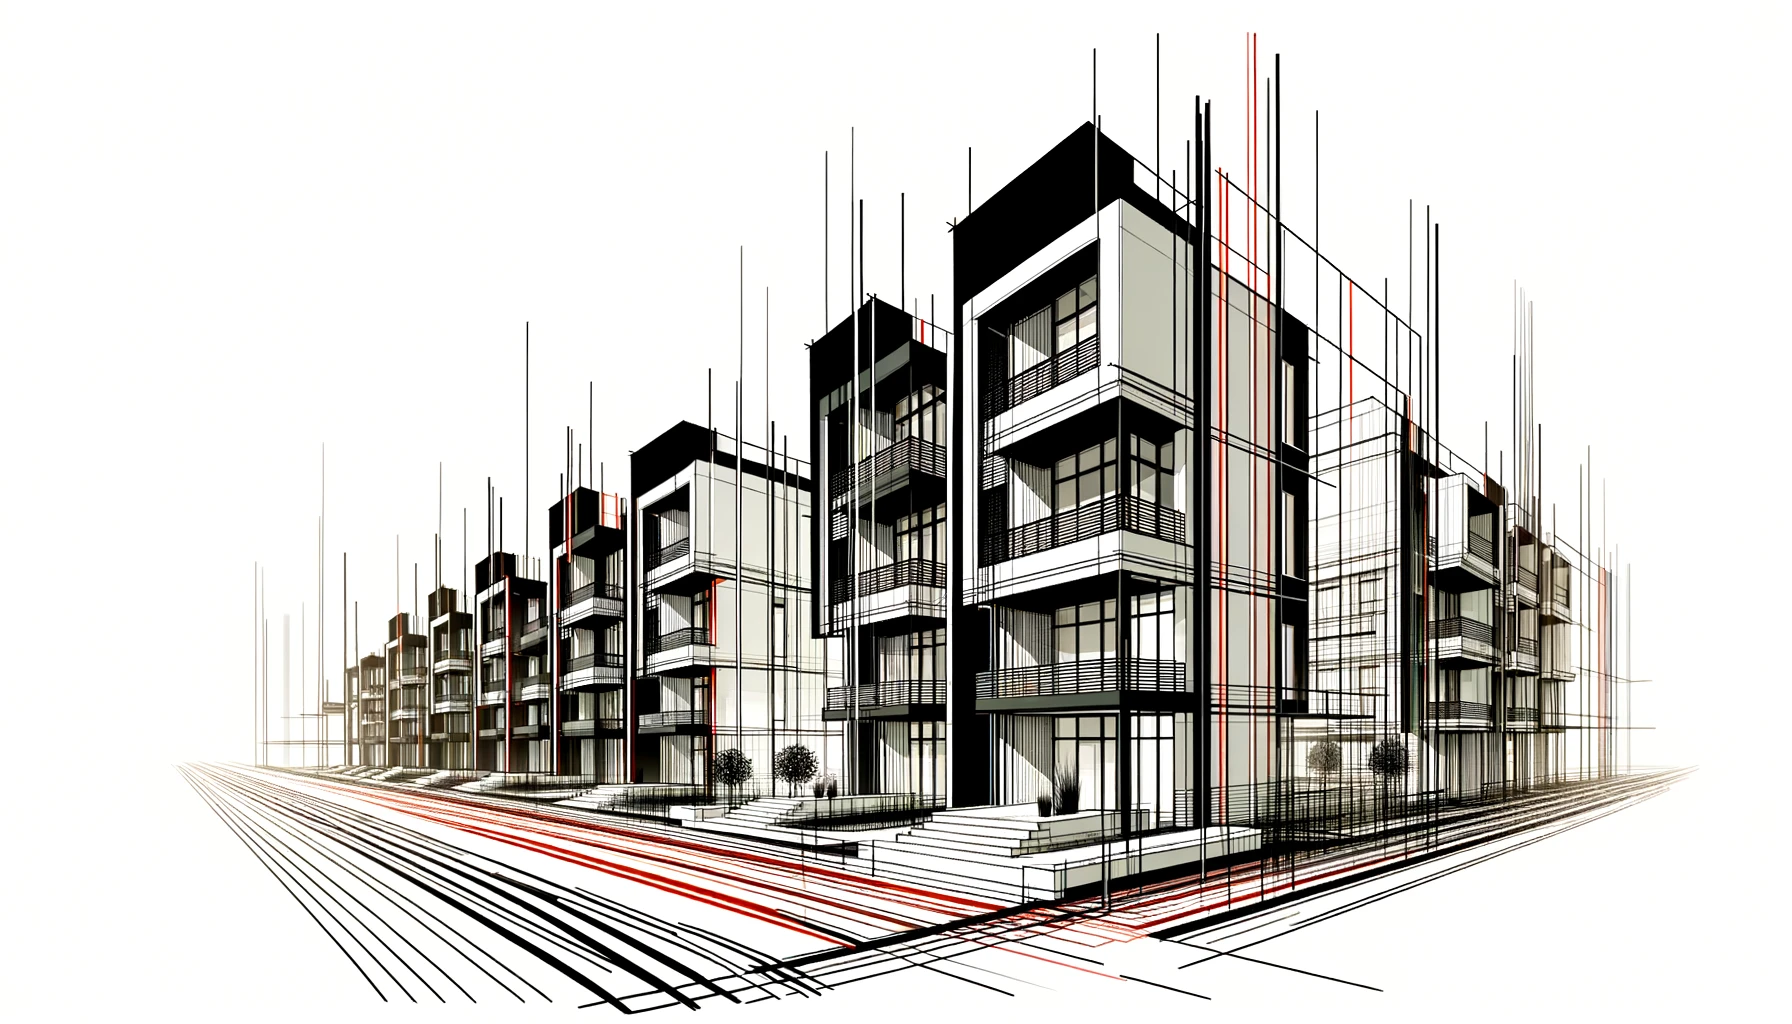 Abstract representation of a row of modern two-level townhouses with bold black and red lines on a white background.